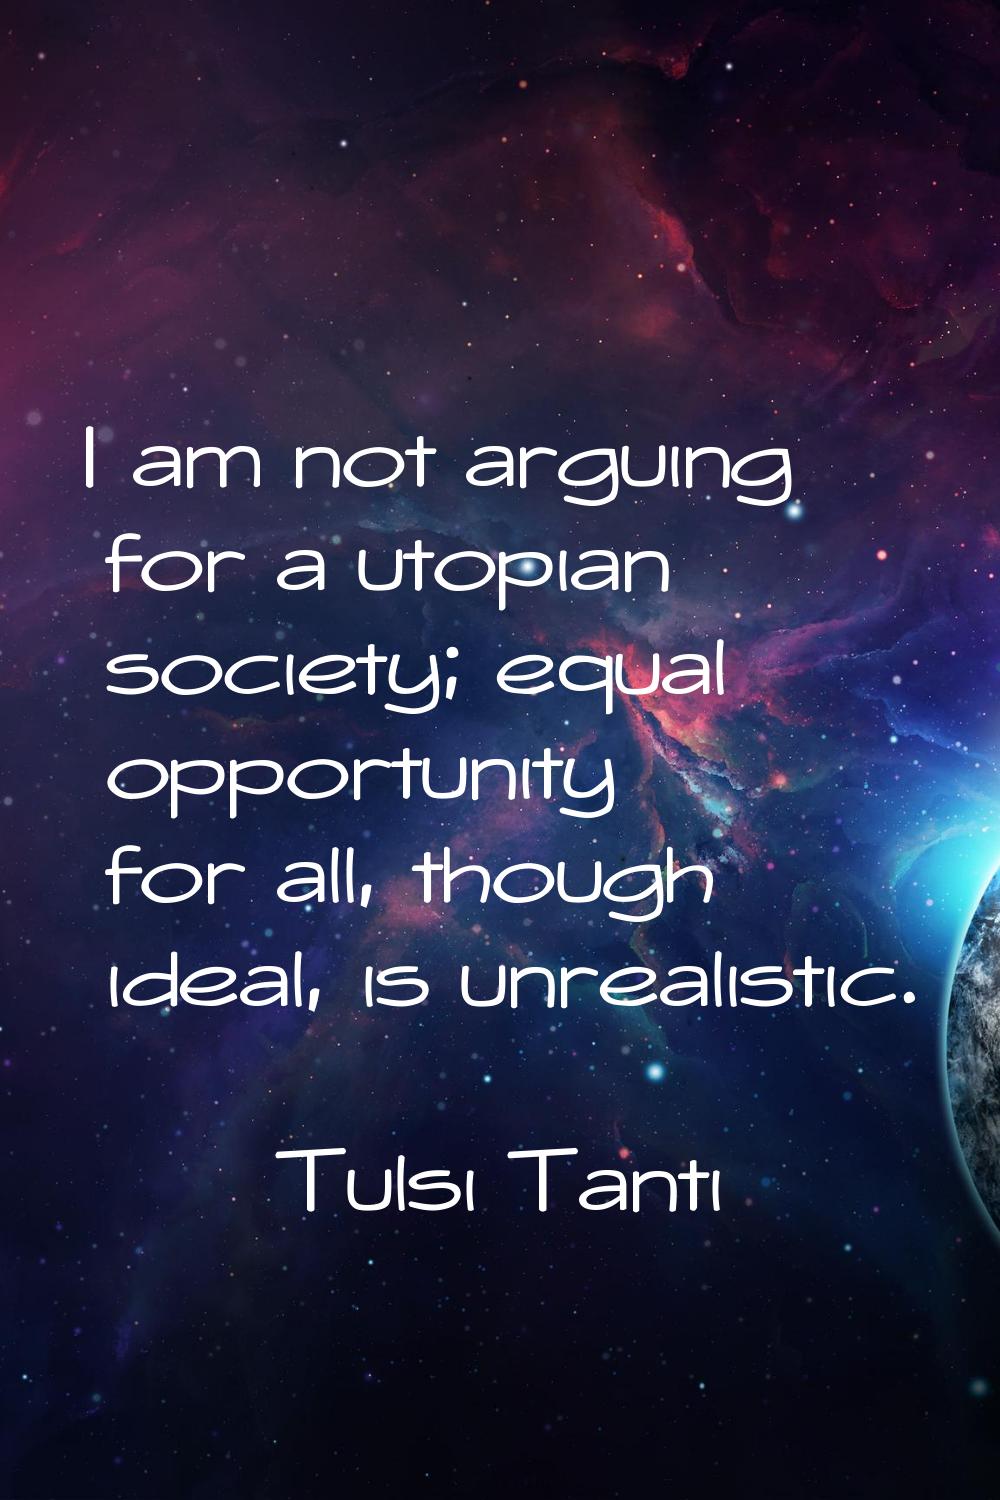 I am not arguing for a utopian society; equal opportunity for all, though ideal, is unrealistic.